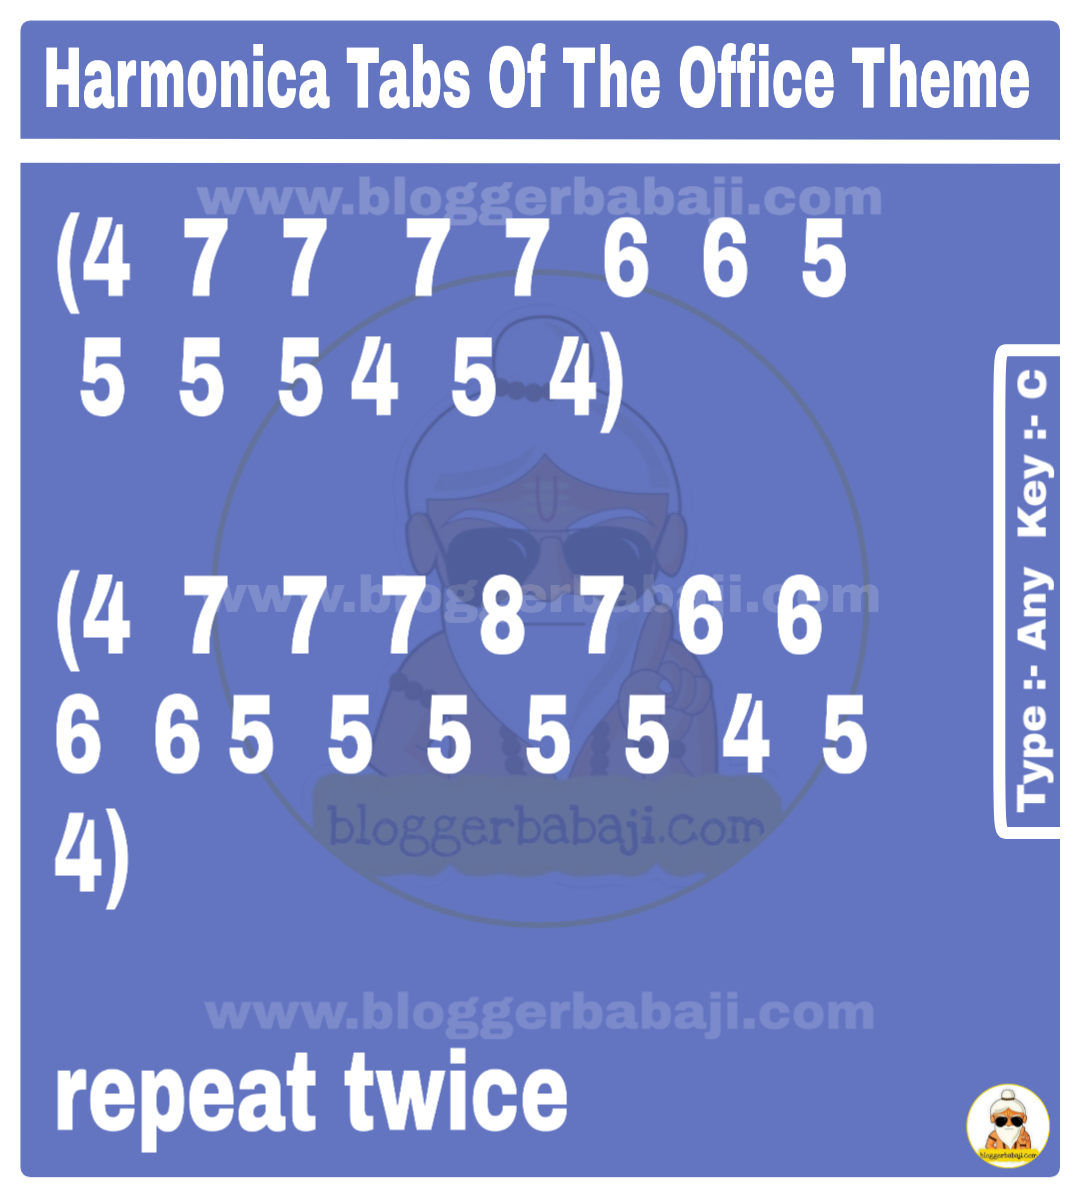 The office theme song harmonica tabs